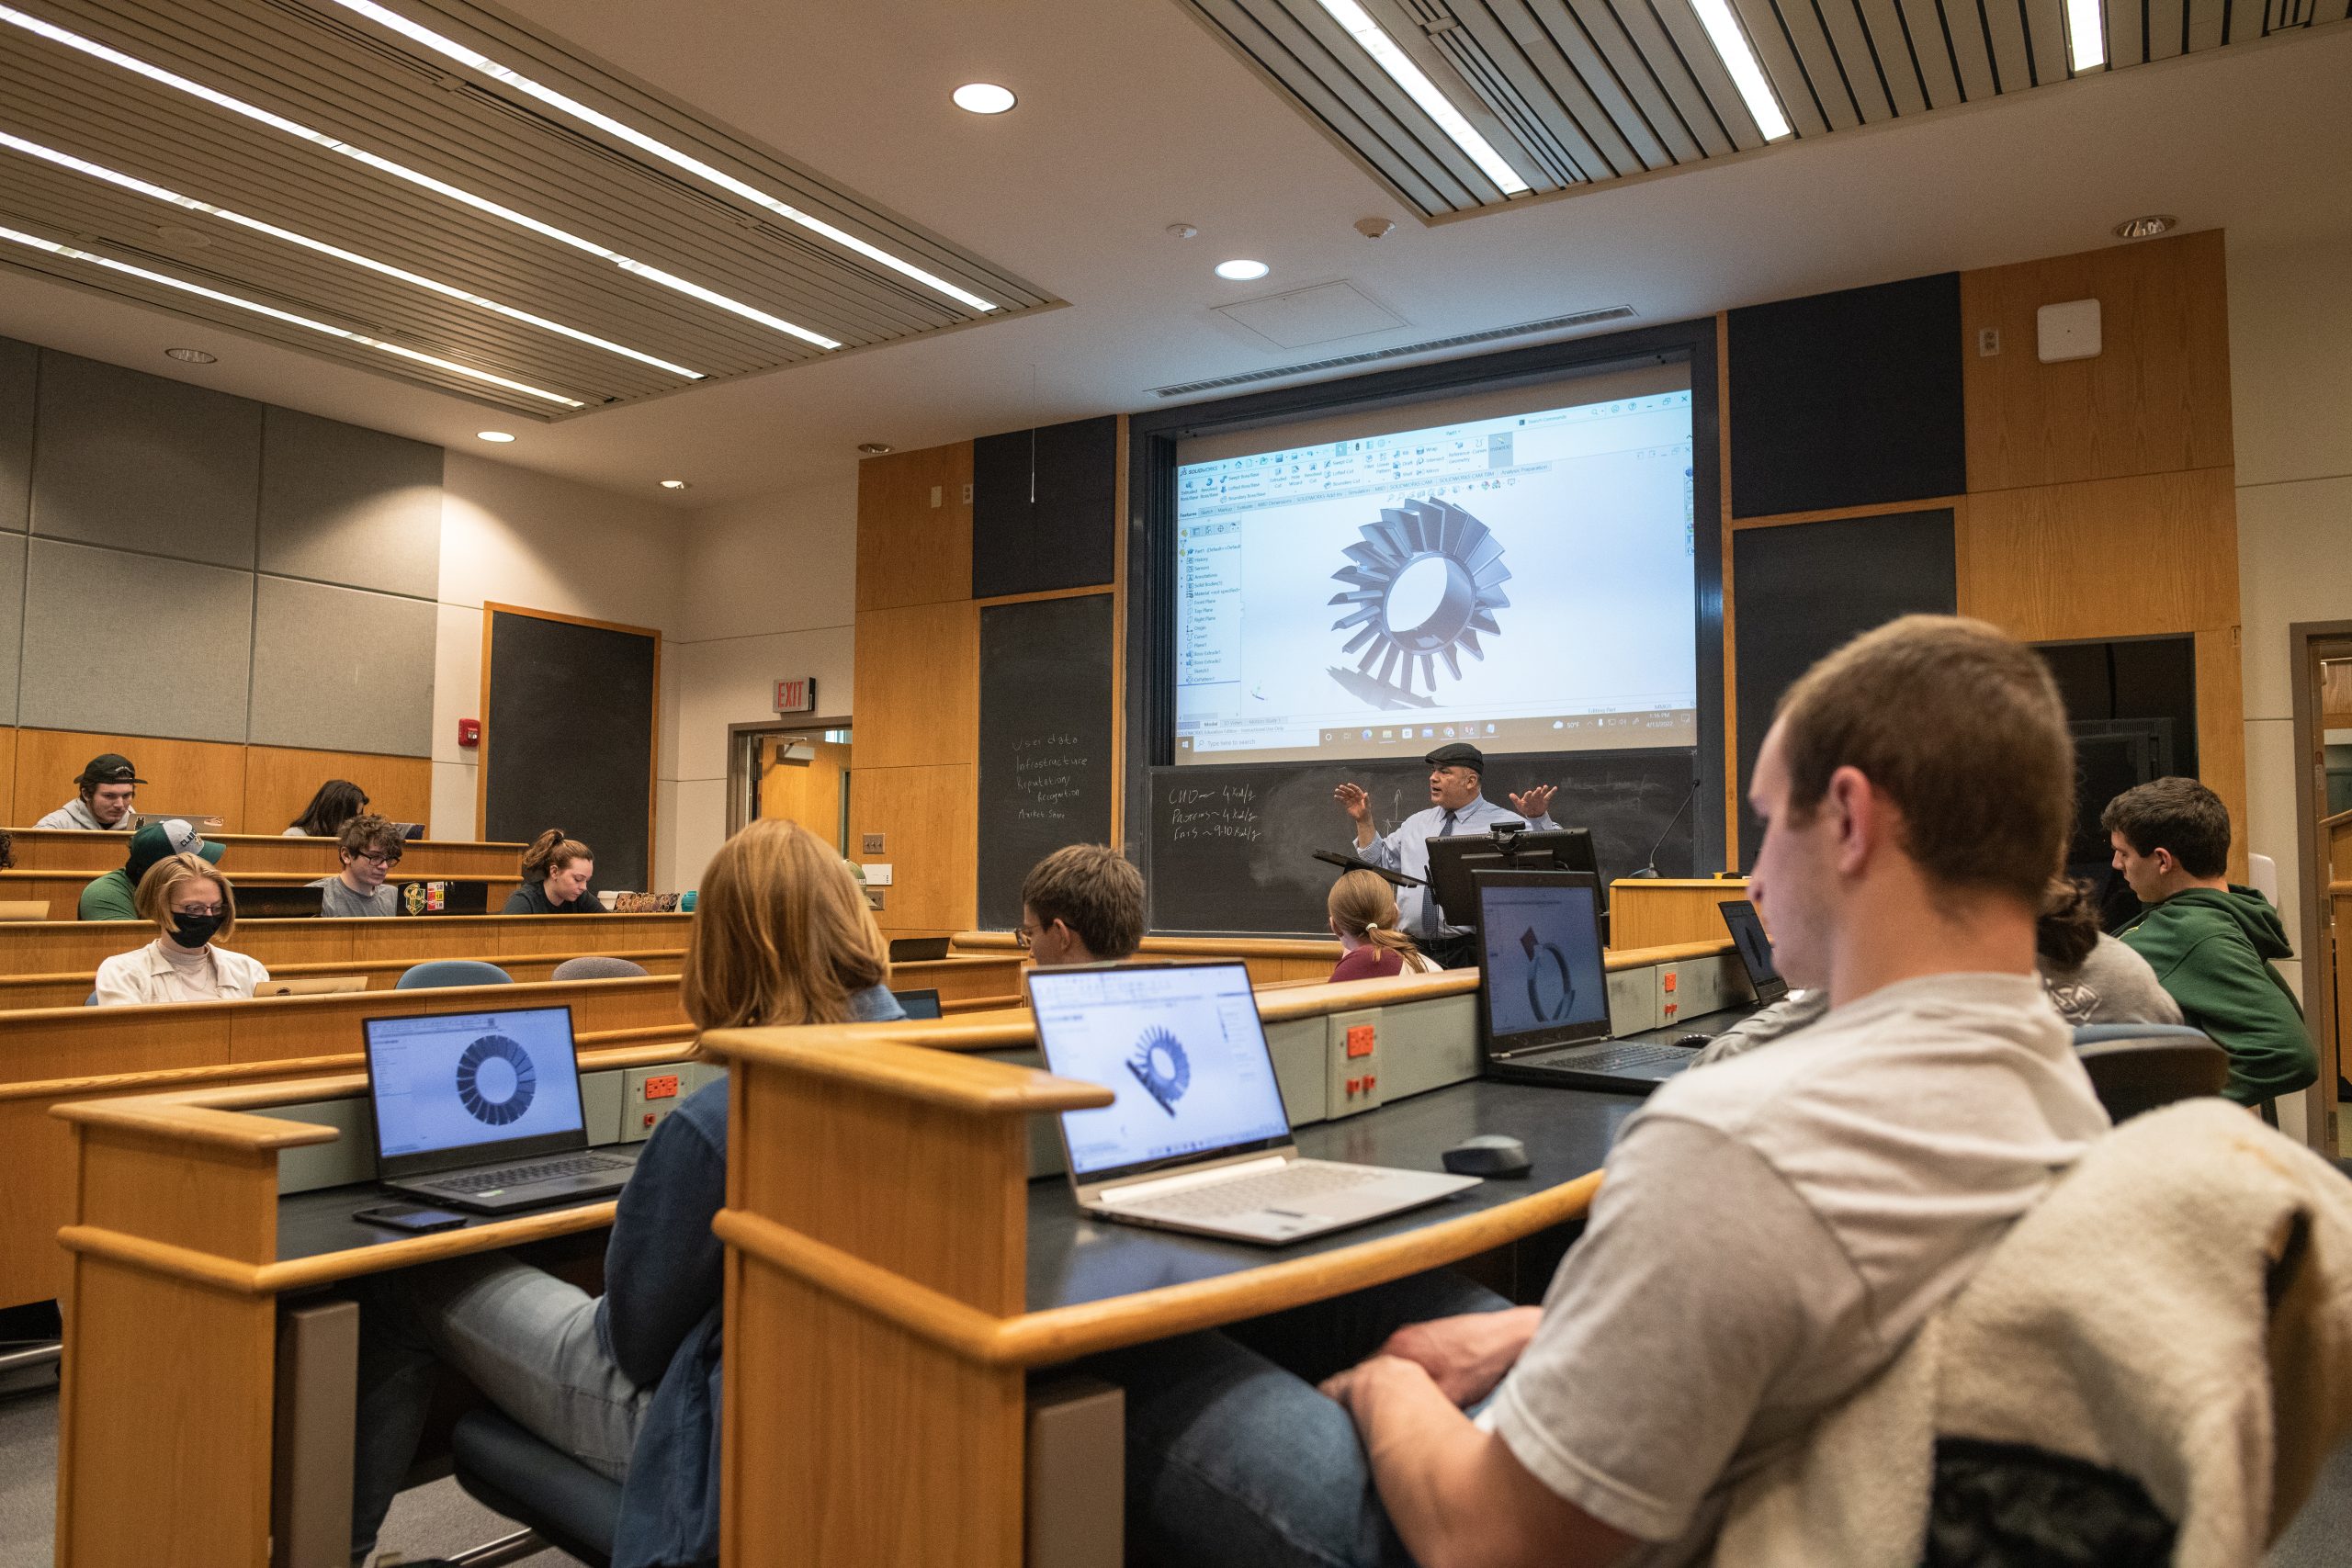 A professor stands at the front of a classroom in front of a projector showing a concept of a gear or turbine. Students sit facing away in the foreground, with the same image displayed on laptops.